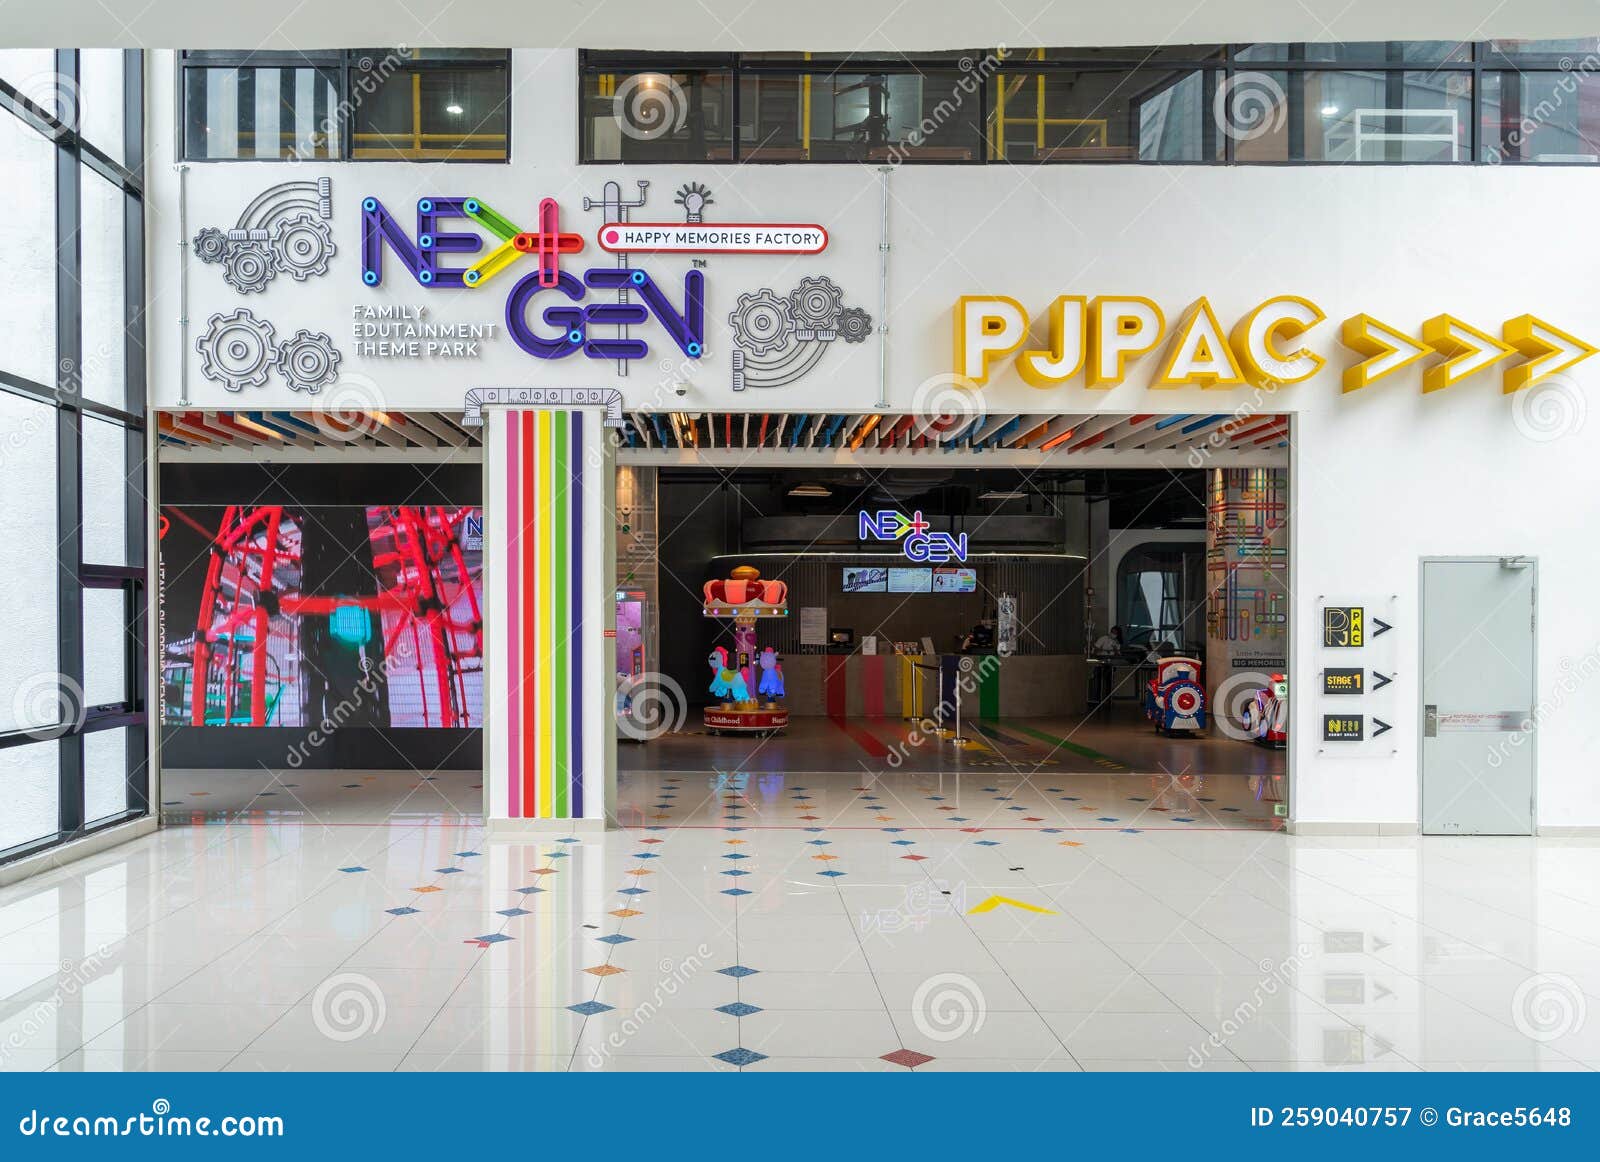 Malaysia 1st Integrated Next Gen Indoor Edutainment Themepark with an